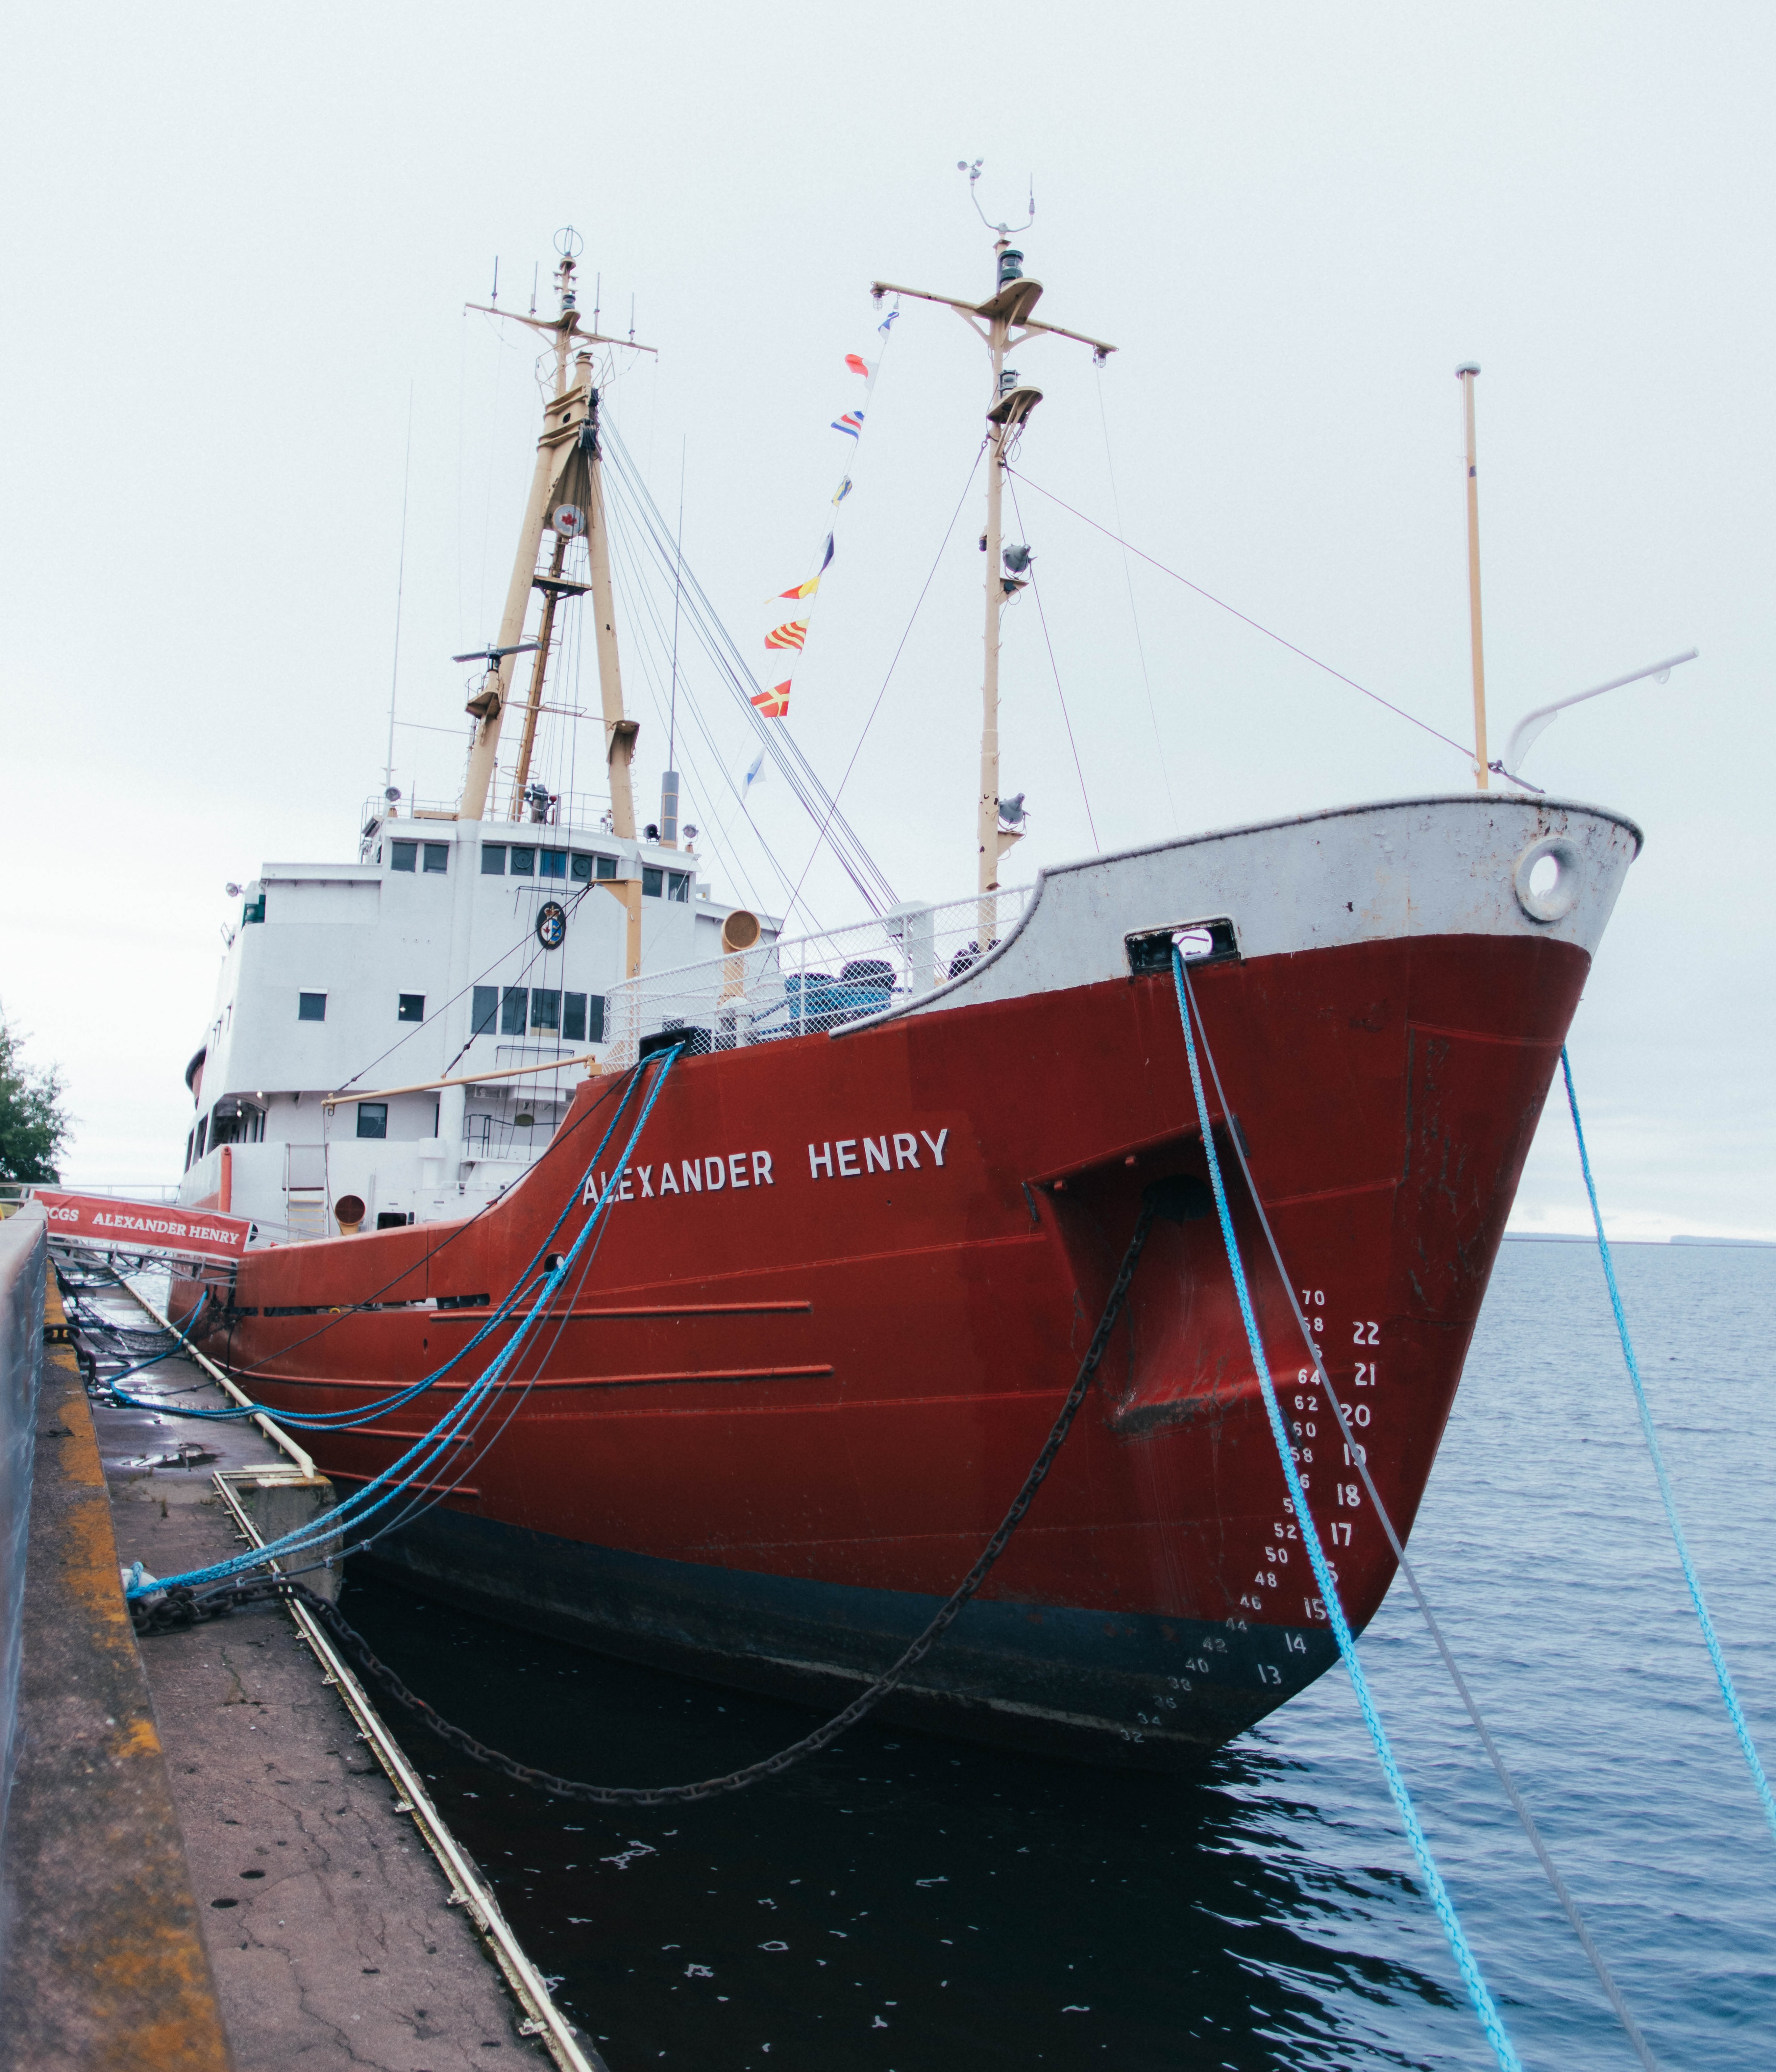 The ship Alexander Henry, a large red and white metal 1950s icebreaker, docked at the Thunder Bay waterfront.